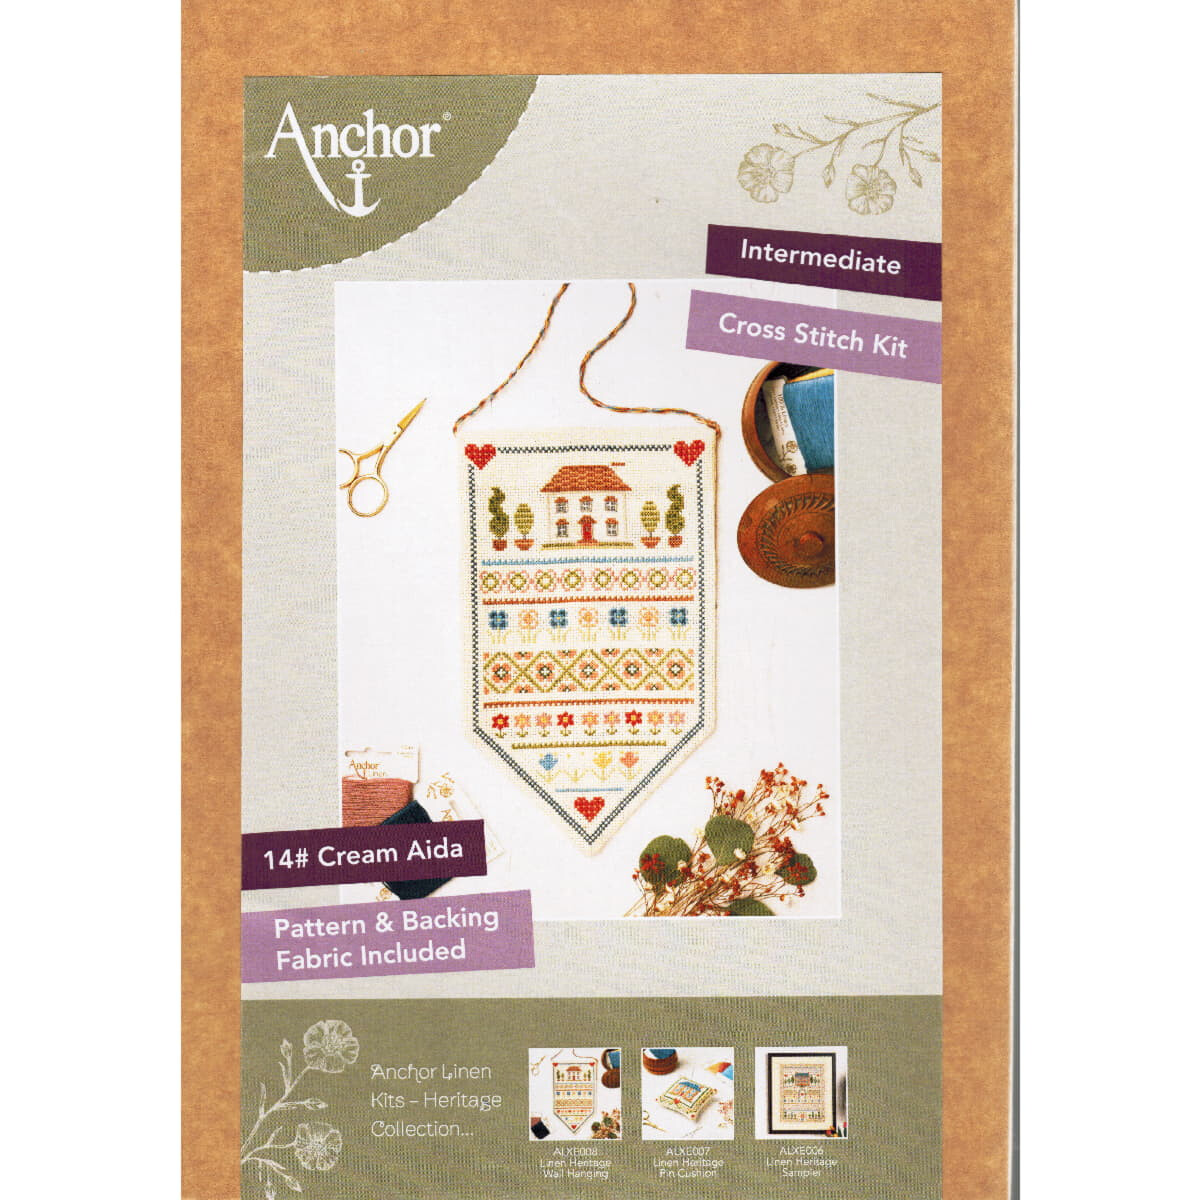 Anchor counted cross stitch kit "Heritage Wall...